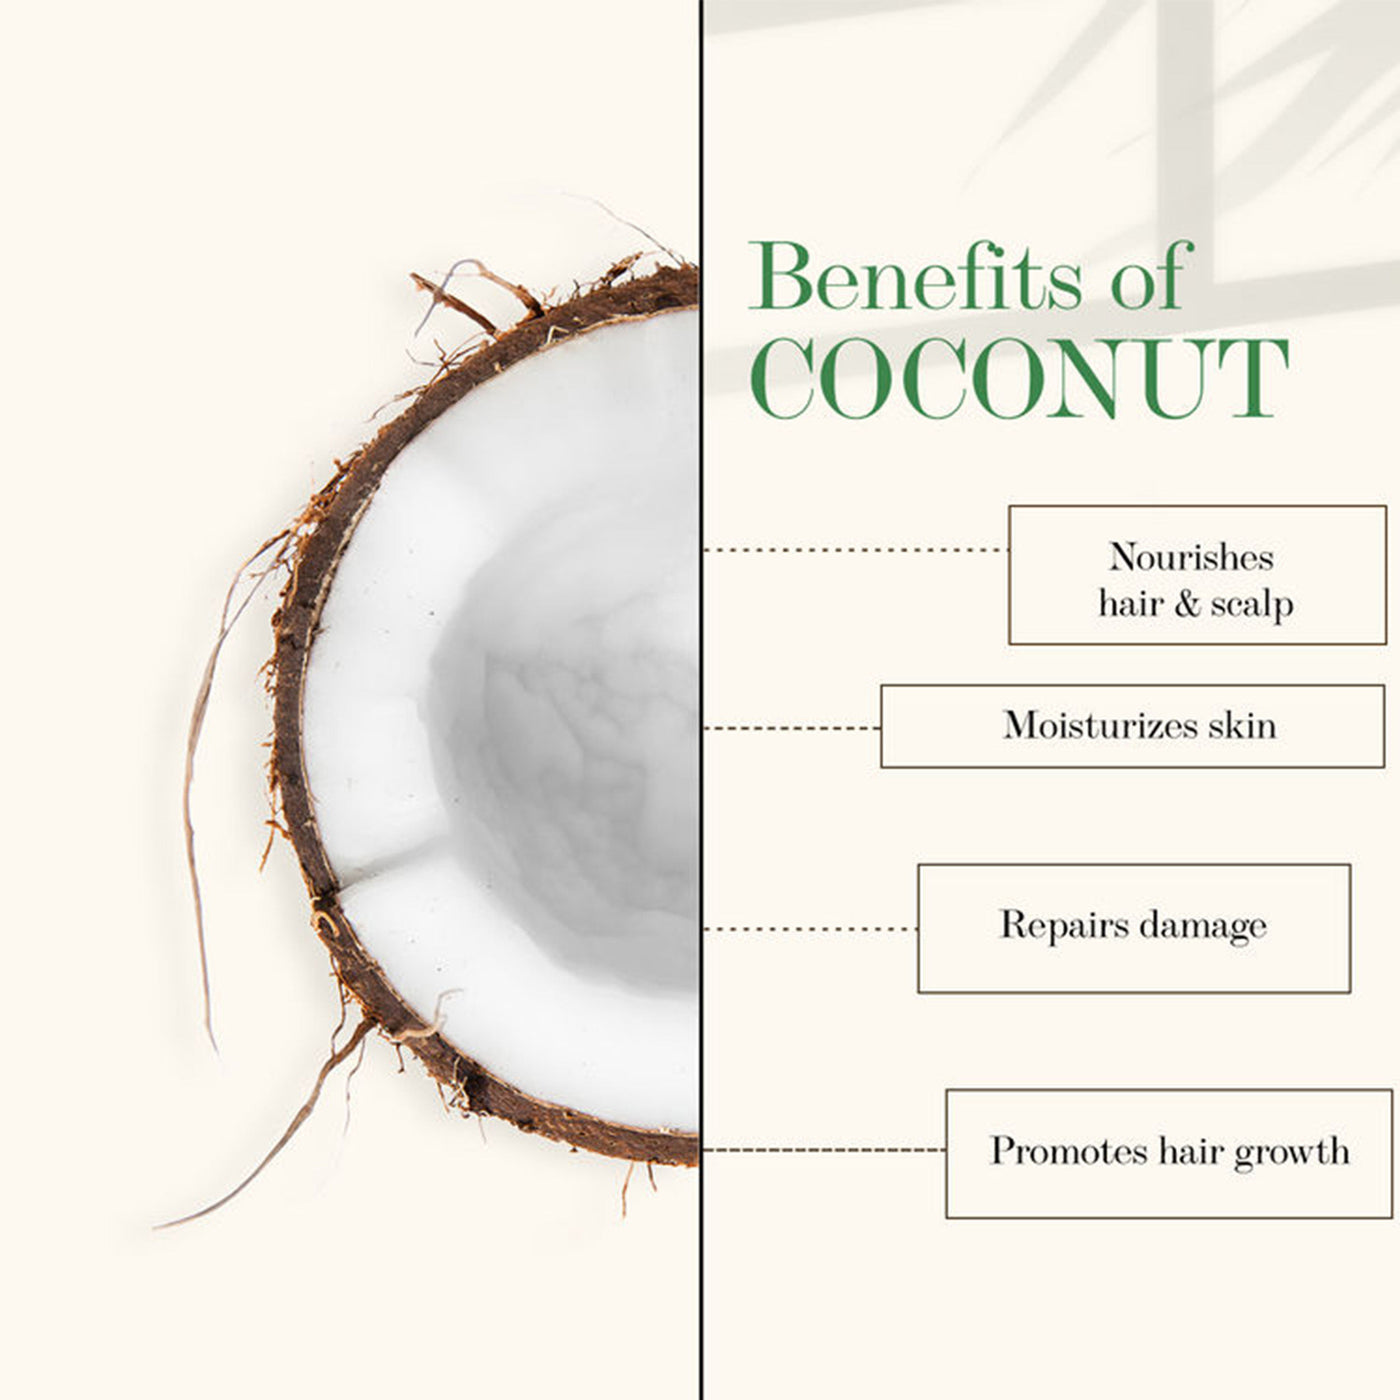 good-vibes-coconut-100-percentage-pure-coldpressed-carrier-oil-hair-growth-anti-ageing-hydrating-no-parabens-no-sulphates-no-mineral-oil-200-ml-1-3